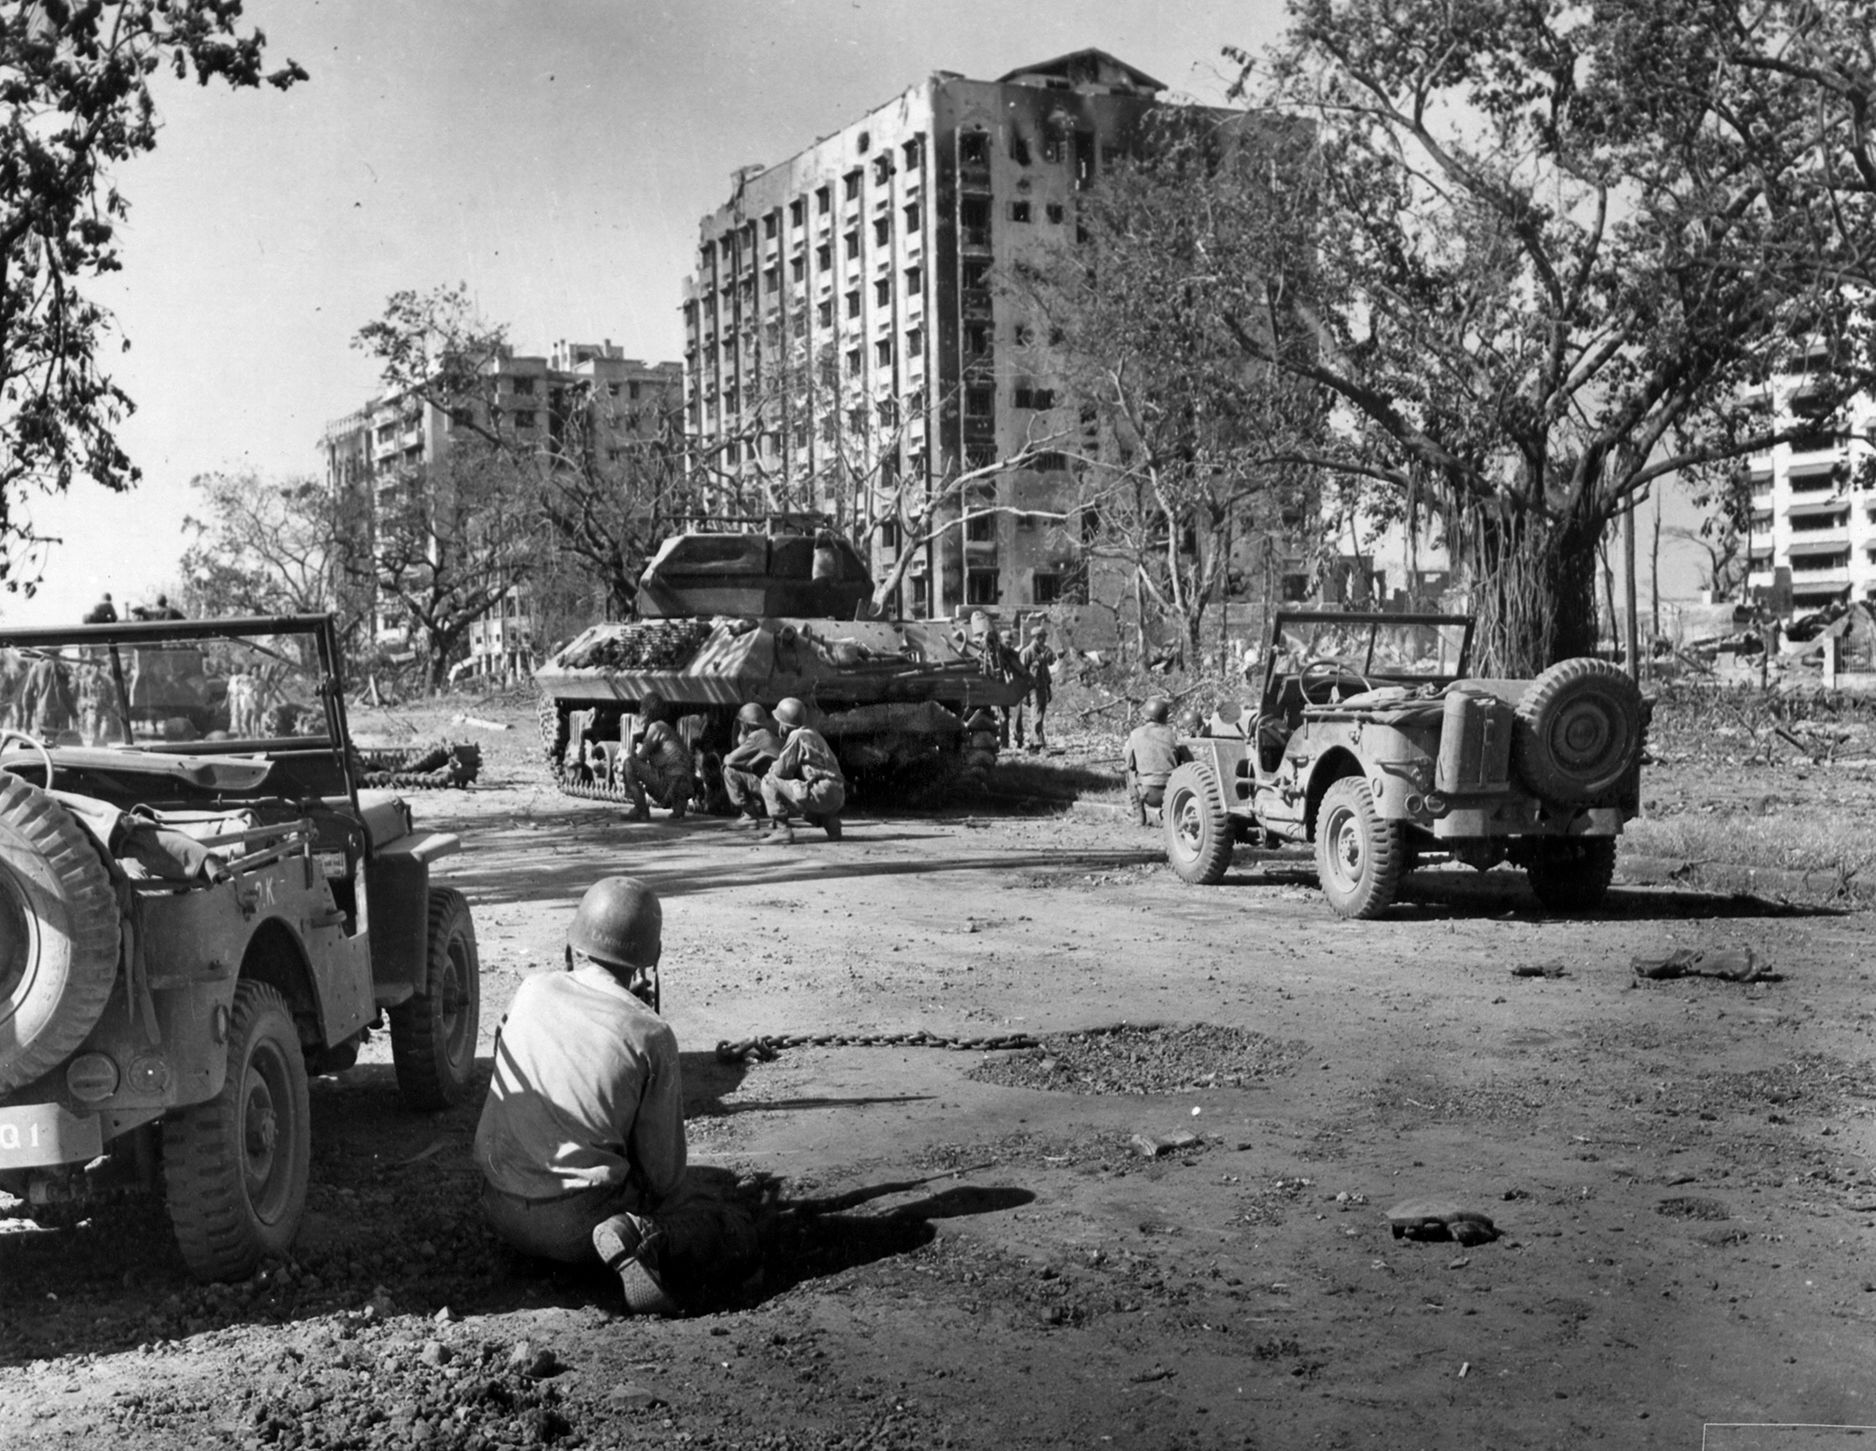 American tanks are poised to enter Manila in this photo taken in March 1945, but their progress is temporarily held up by Japanese sniper and machine-gun fire. American soldiers crouch behind the vehicles, taking cover from the hail of bullets.